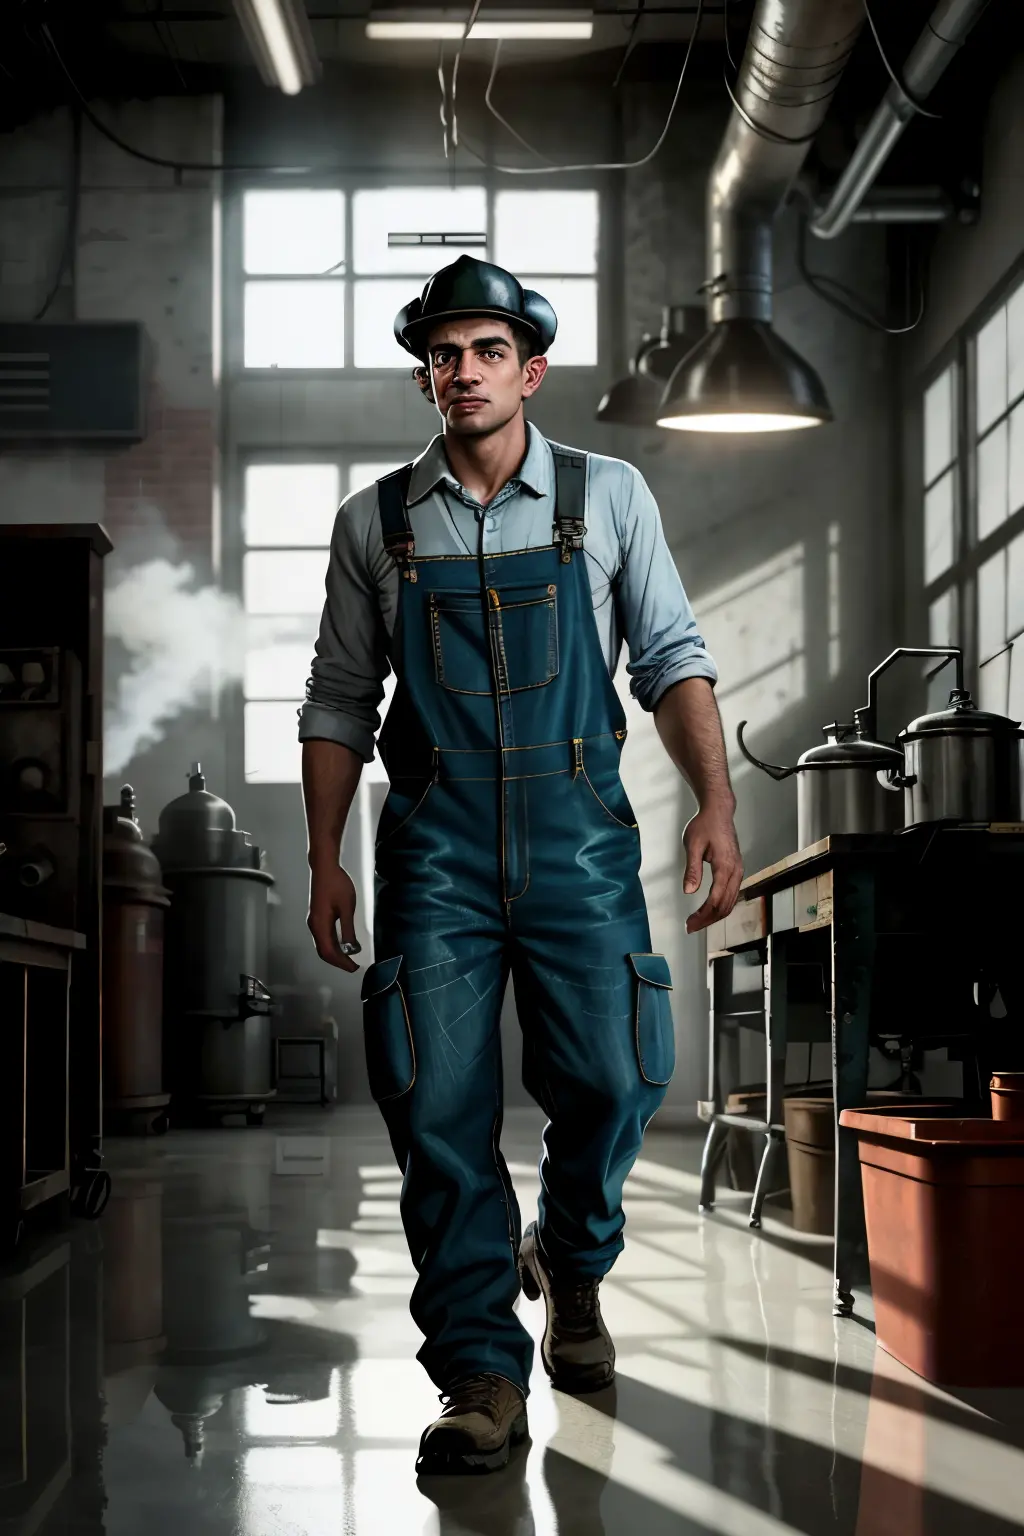 In a 1900s industrial space, a robust worker clad in grease-stained overalls and a battered hat stands before an intricately mac...